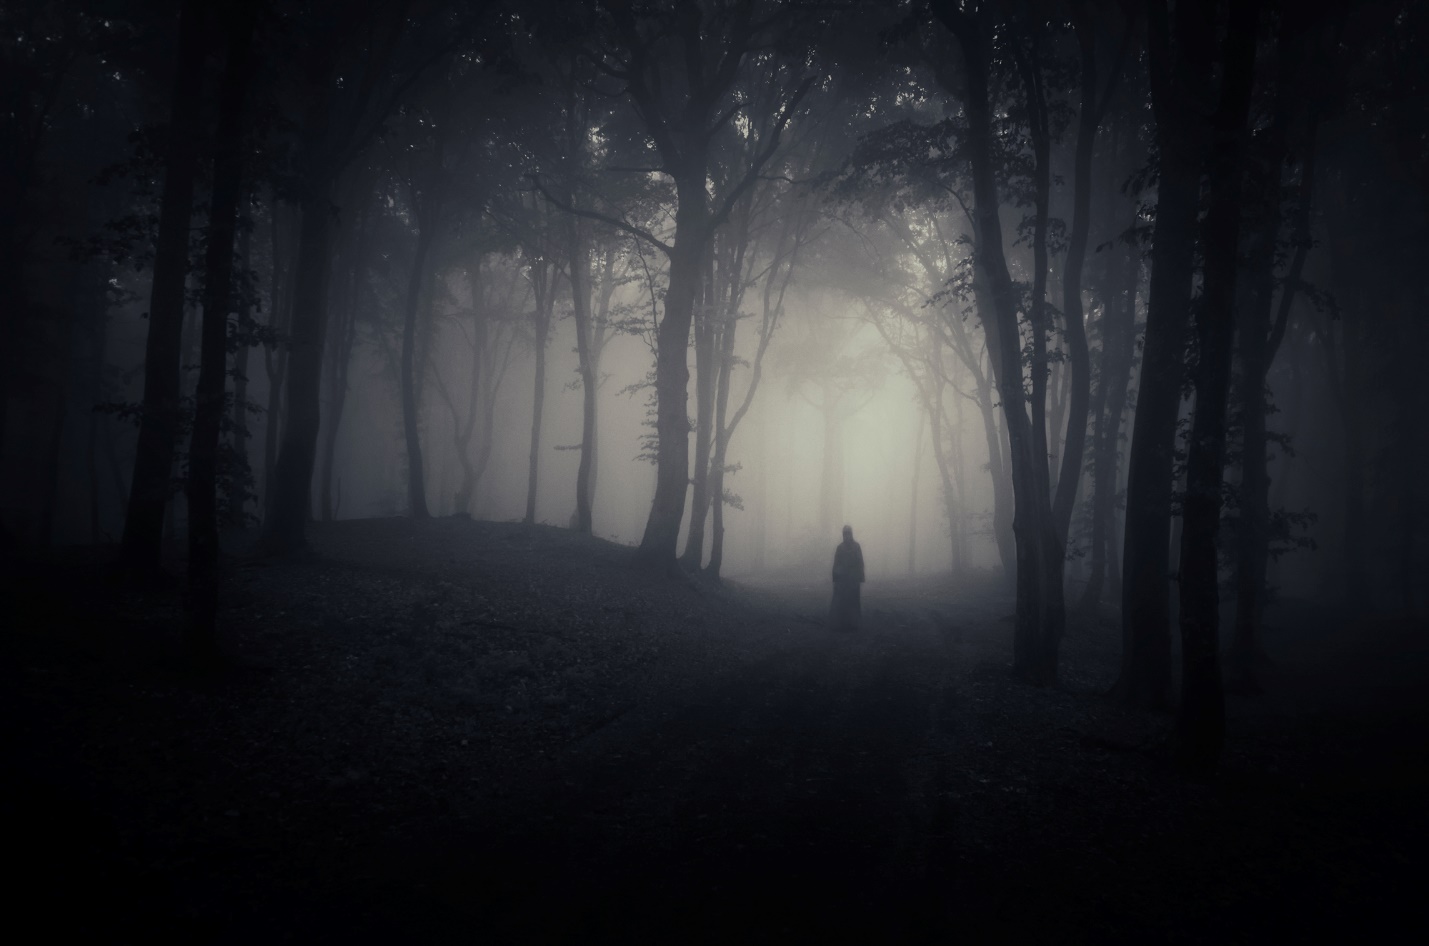 A person standing in a foggy forest

Description automatically generated